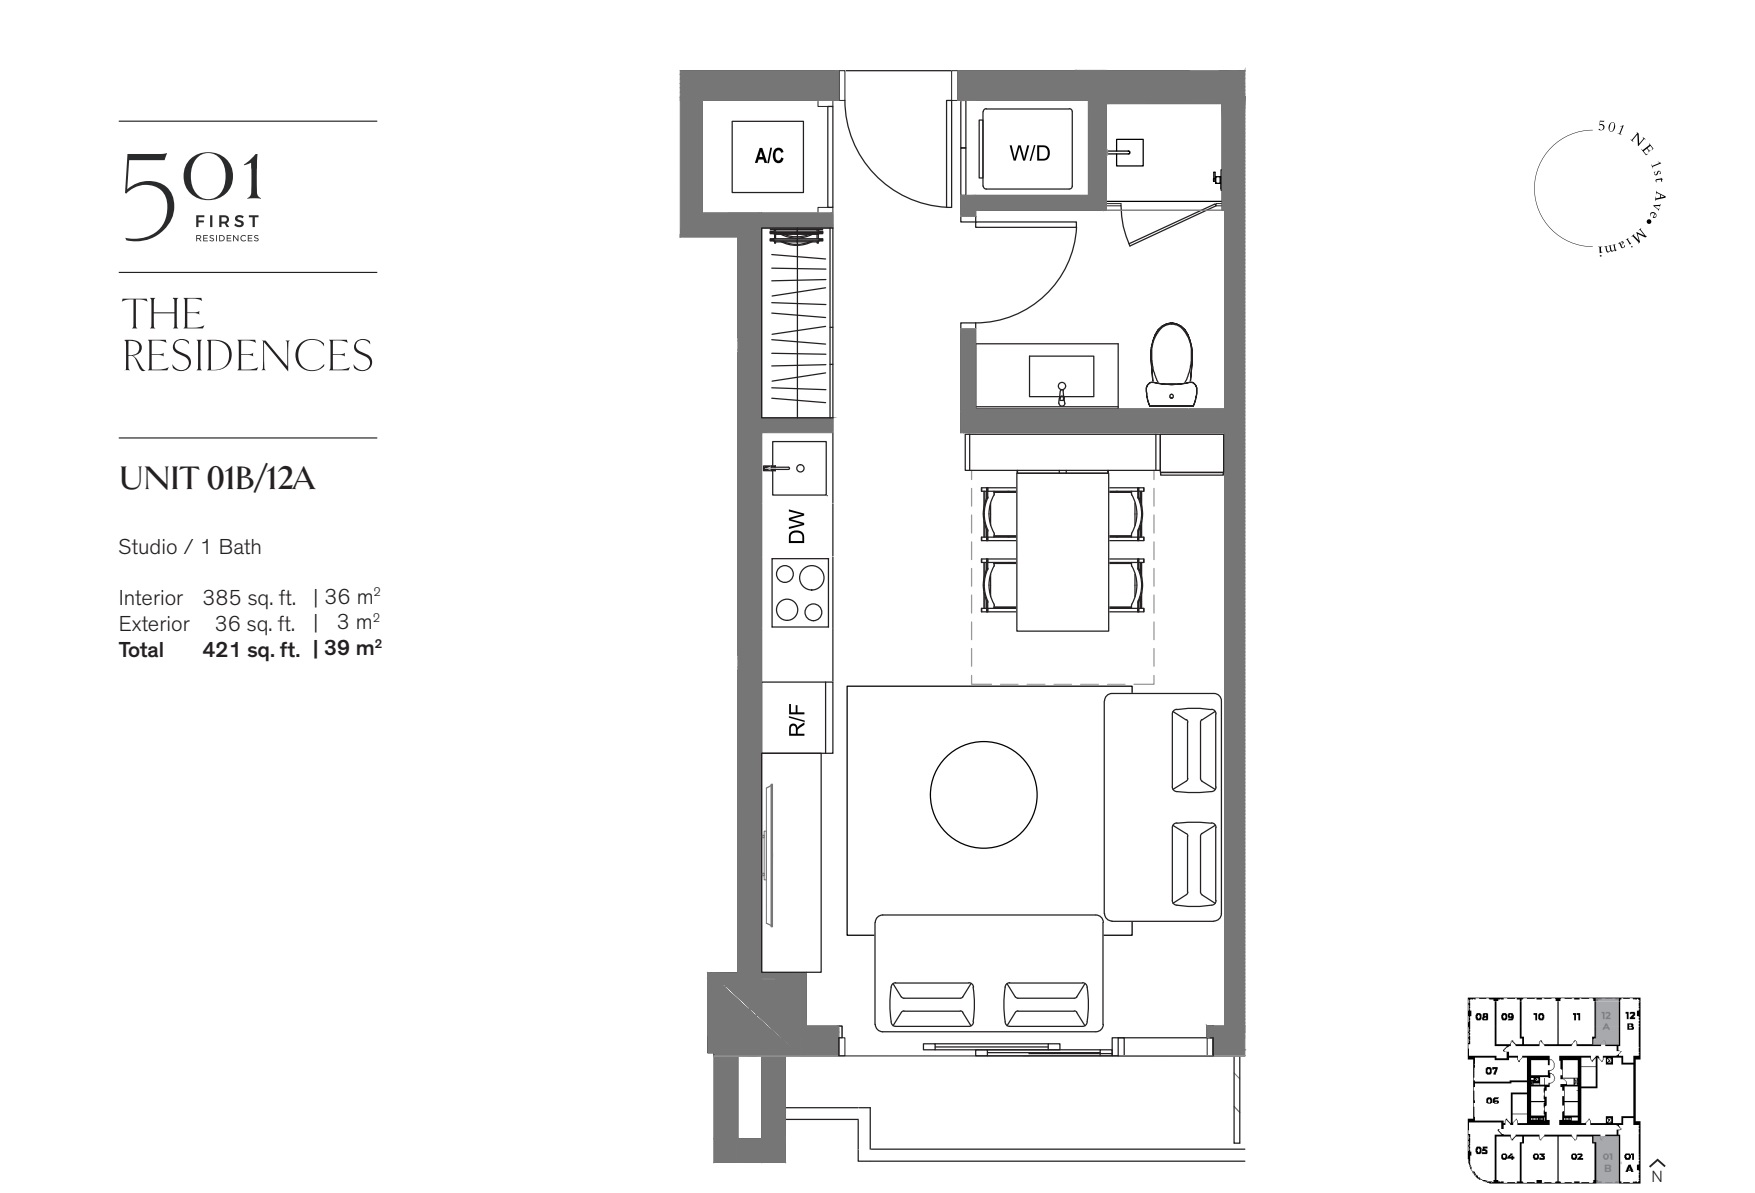 501 FIRST Residences Unit 01B 12A